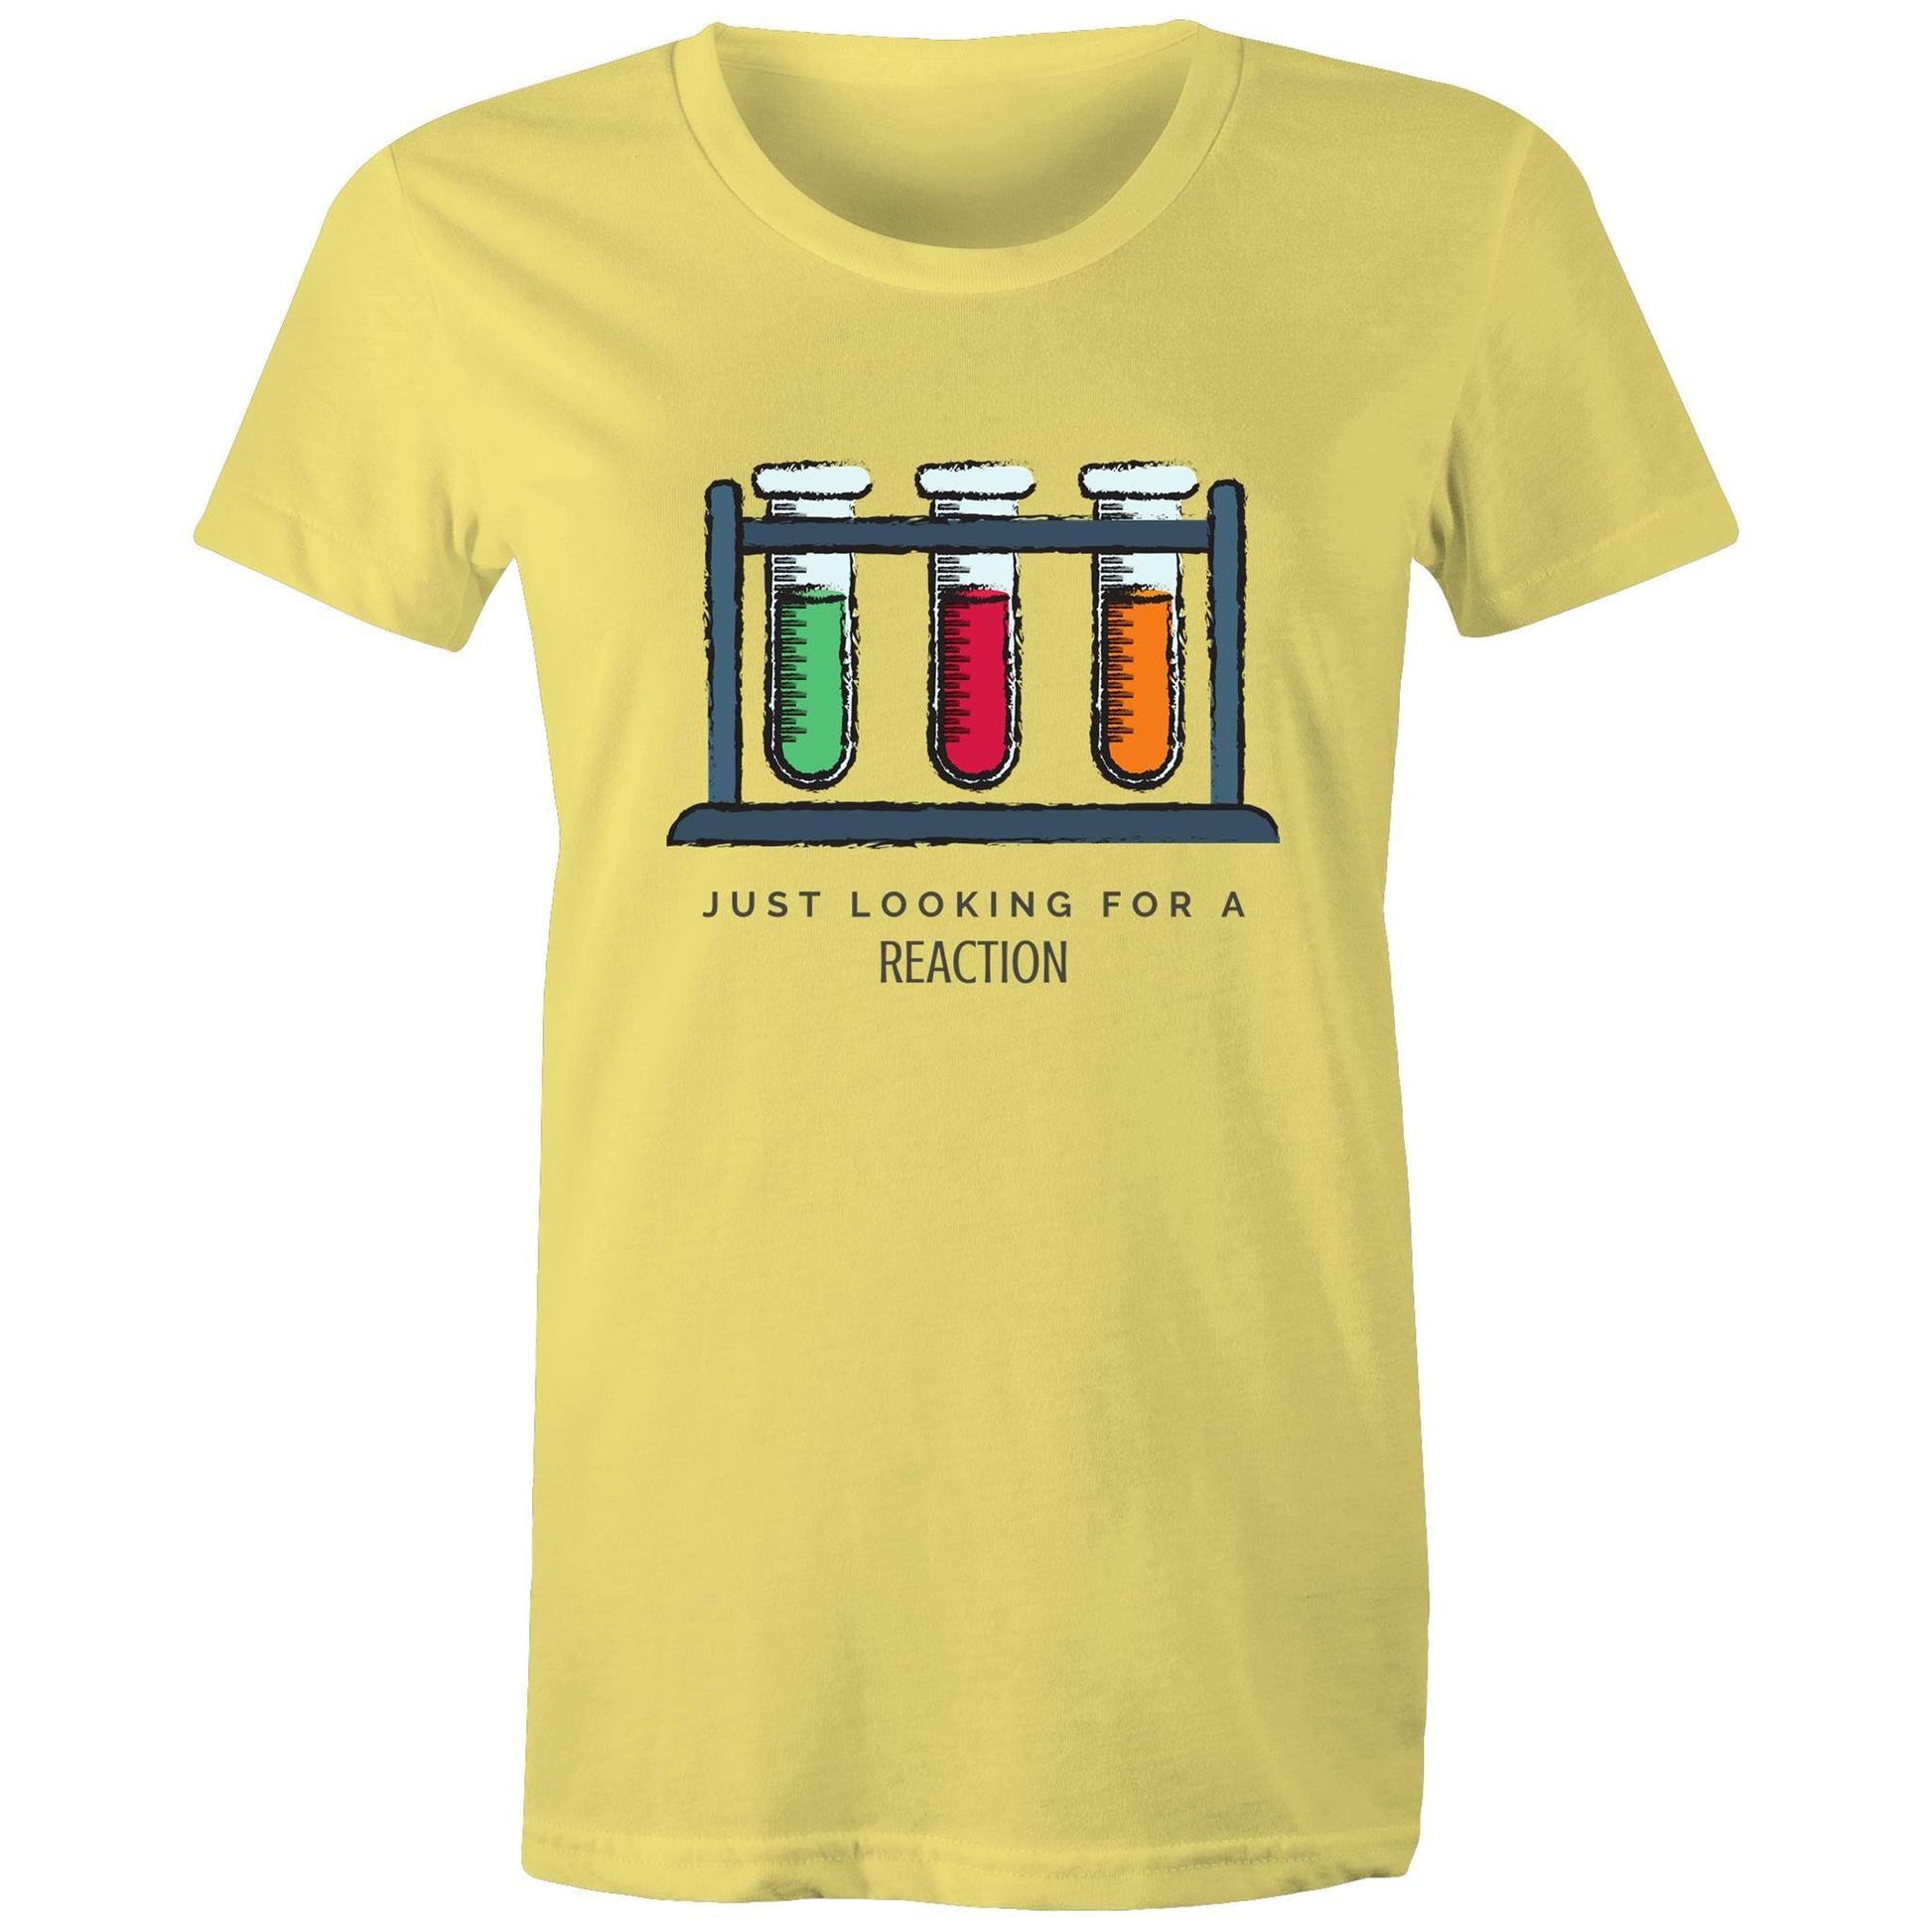 Test Tube, Just Looking For A Reaction - Women's T-shirt Yellow Womens T-shirt Science Womens